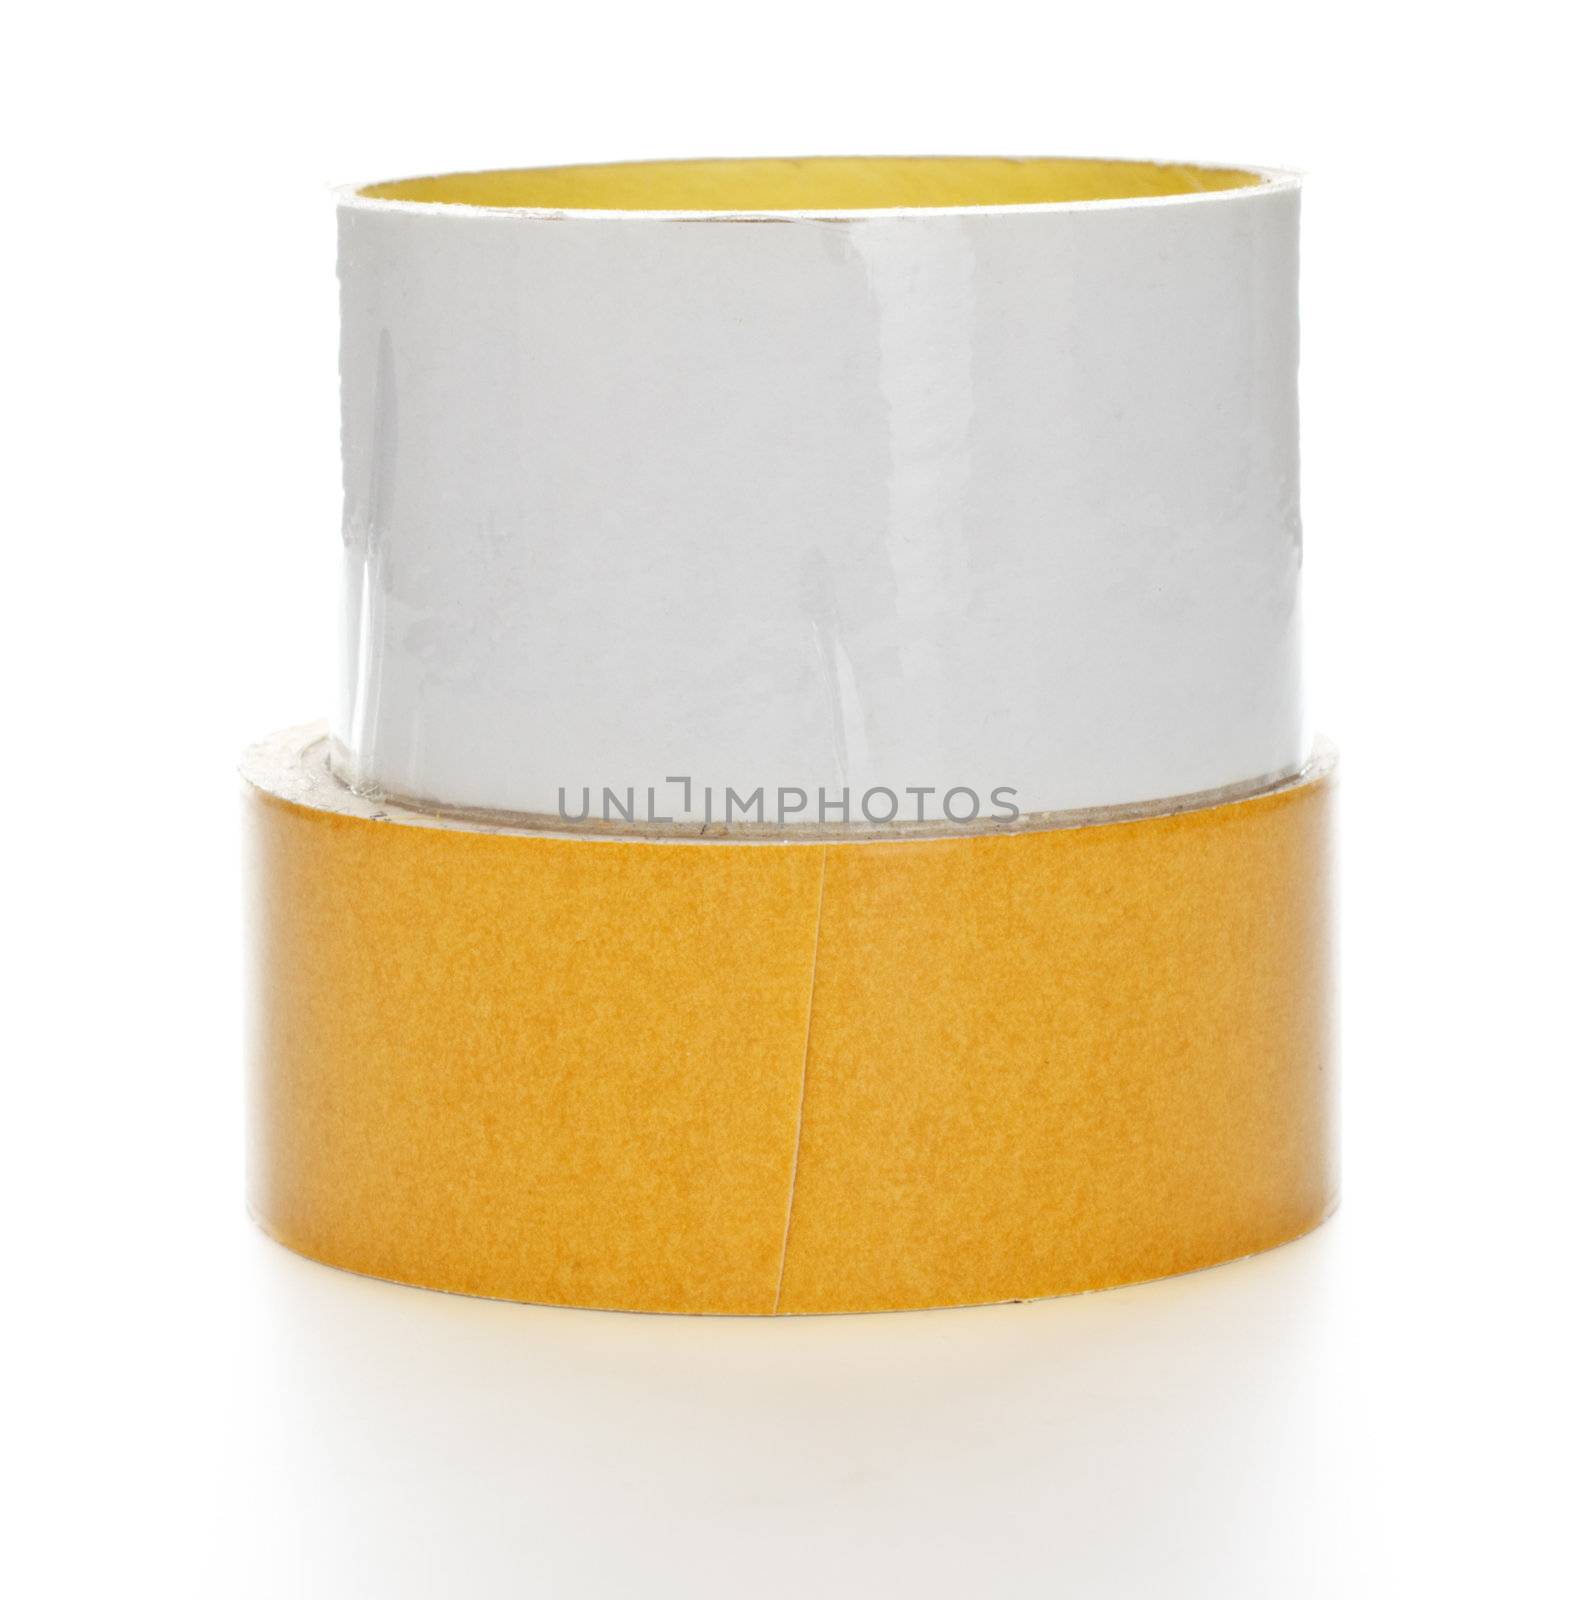 mirror adhesive tape isolated on white background